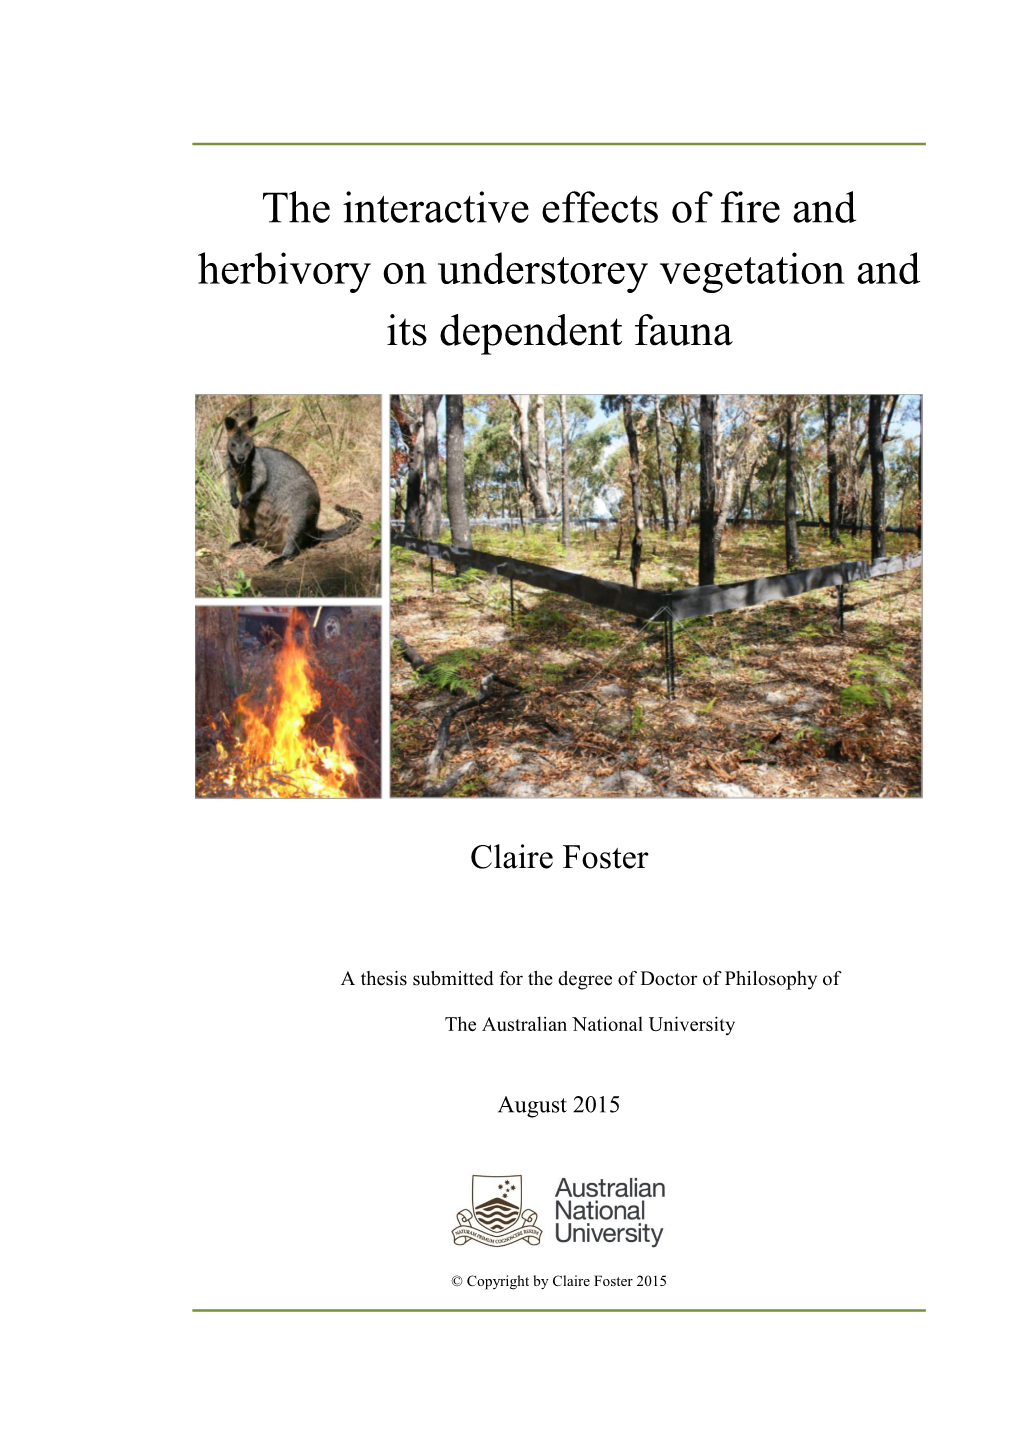 The Interactive Effects of Fire and Herbivory on Understorey Vegetation and Its Dependent Fauna